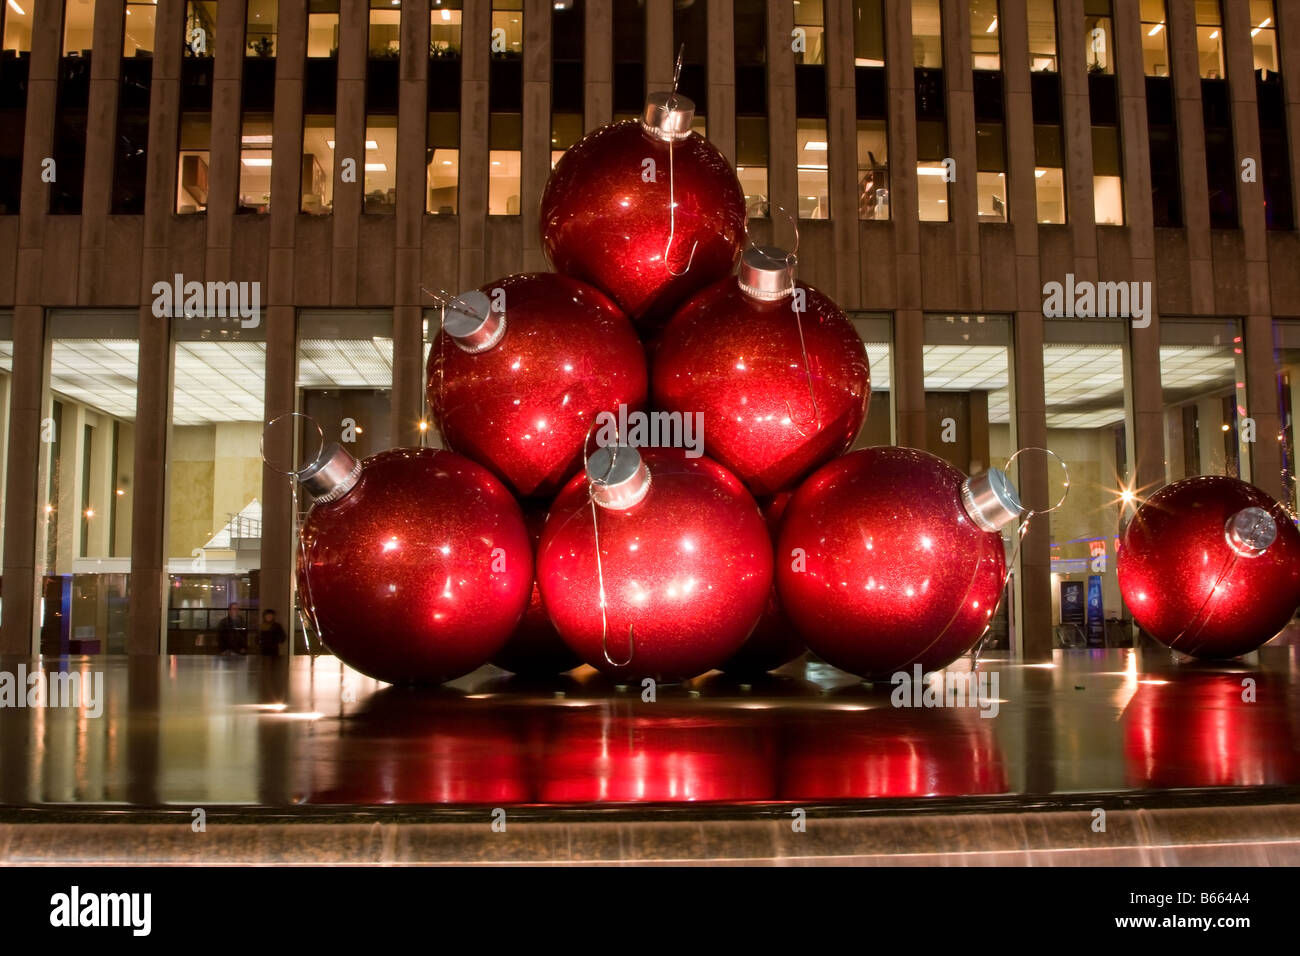 big-red-balls-as-ornaments-for-the-christmas-tree-as-an-art-exhibit-B664A4.jpg